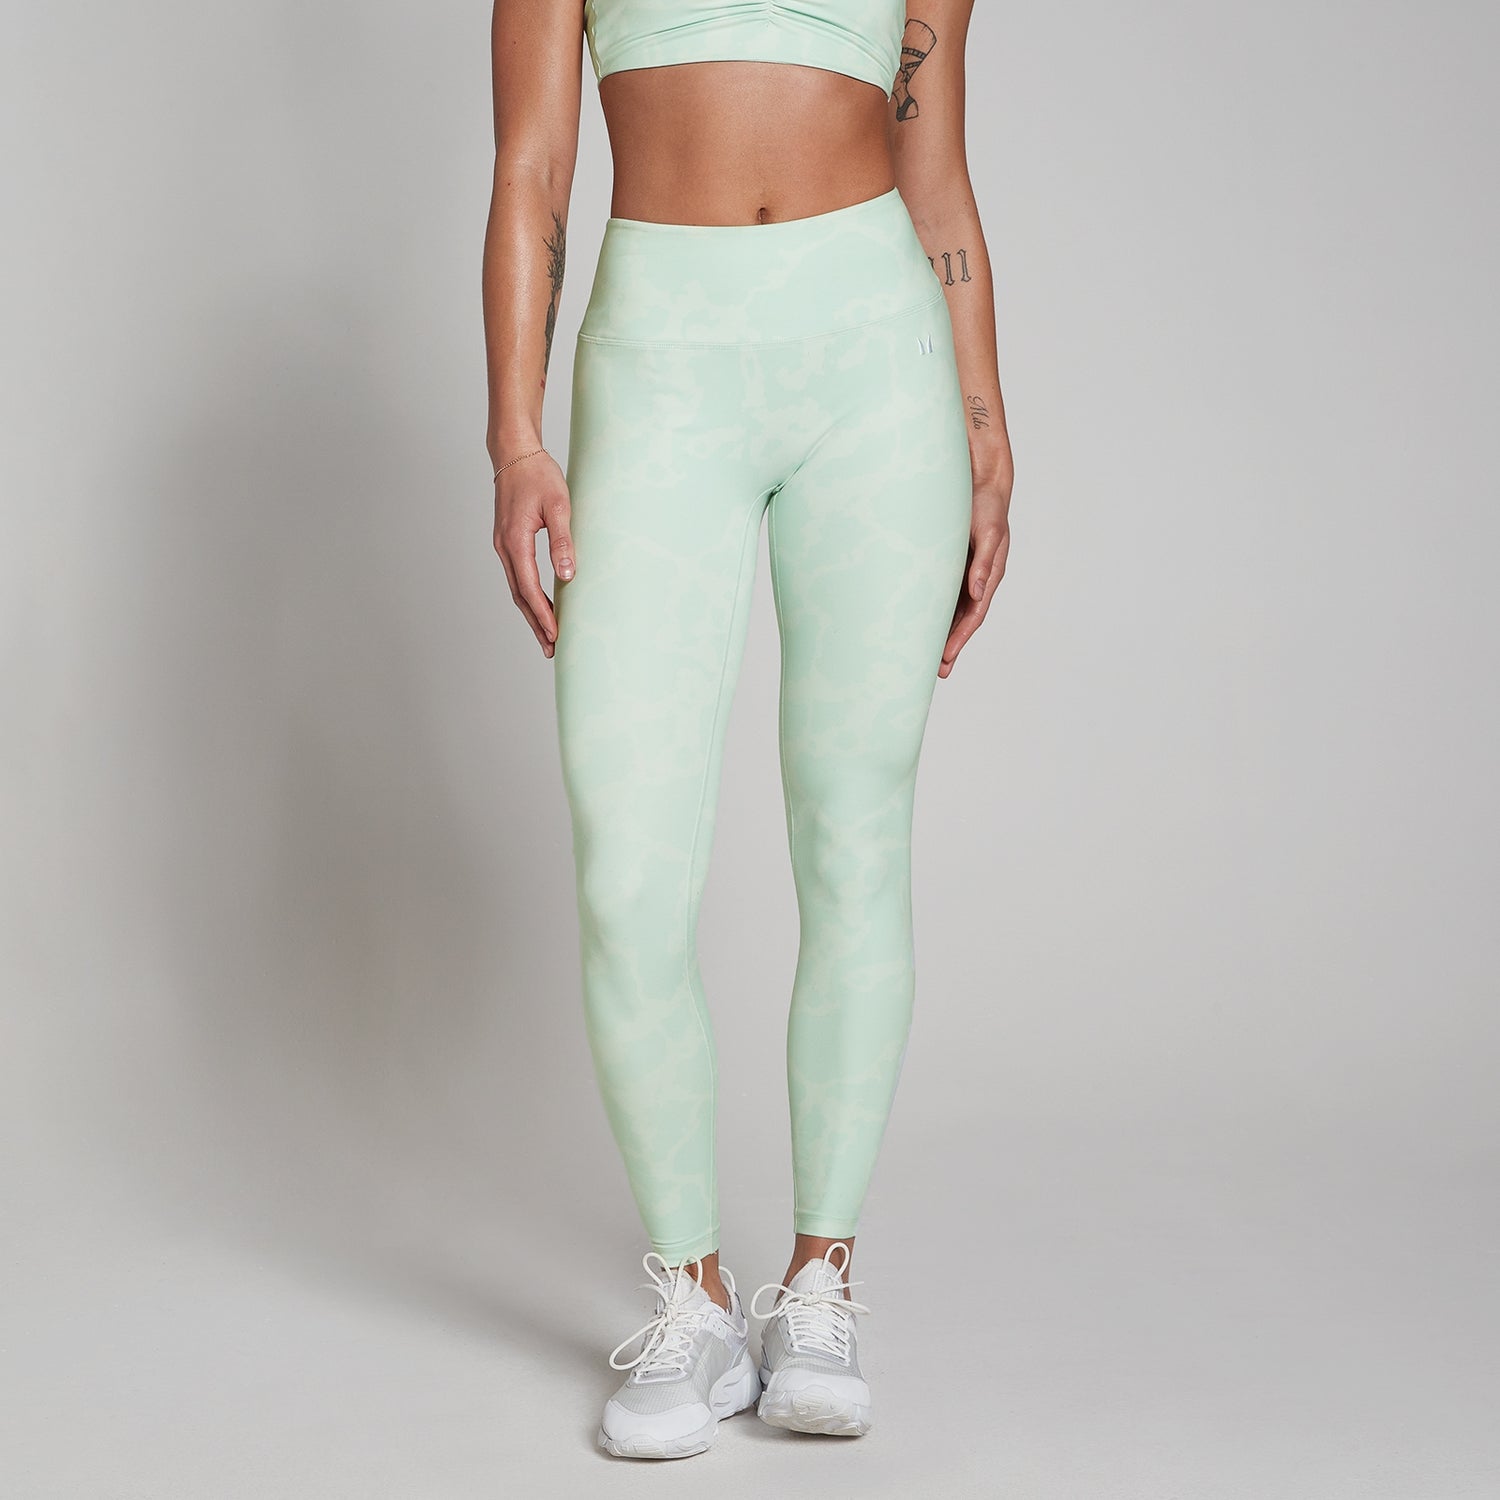 MP Women's Tempo Abstract Leggings - Soft Mint - XS